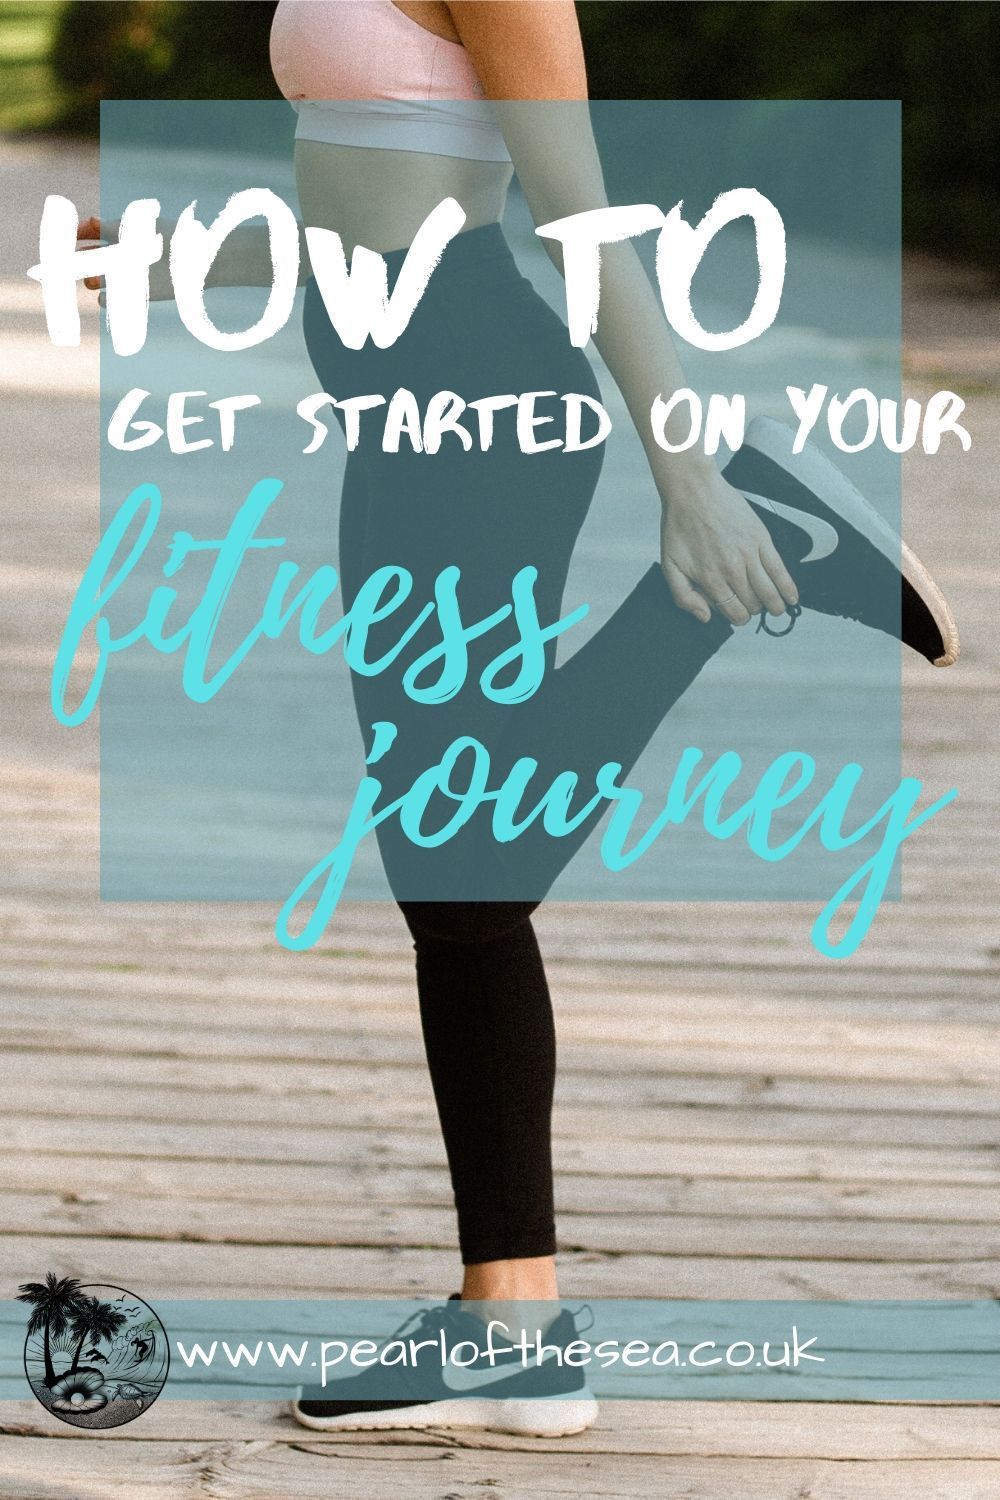 How to get started on your fitness journey - Fitness tips for beginners - How to get started on your fitness journey - Fitness tips for beginners -   19 fitness Lifestyle you are ideas